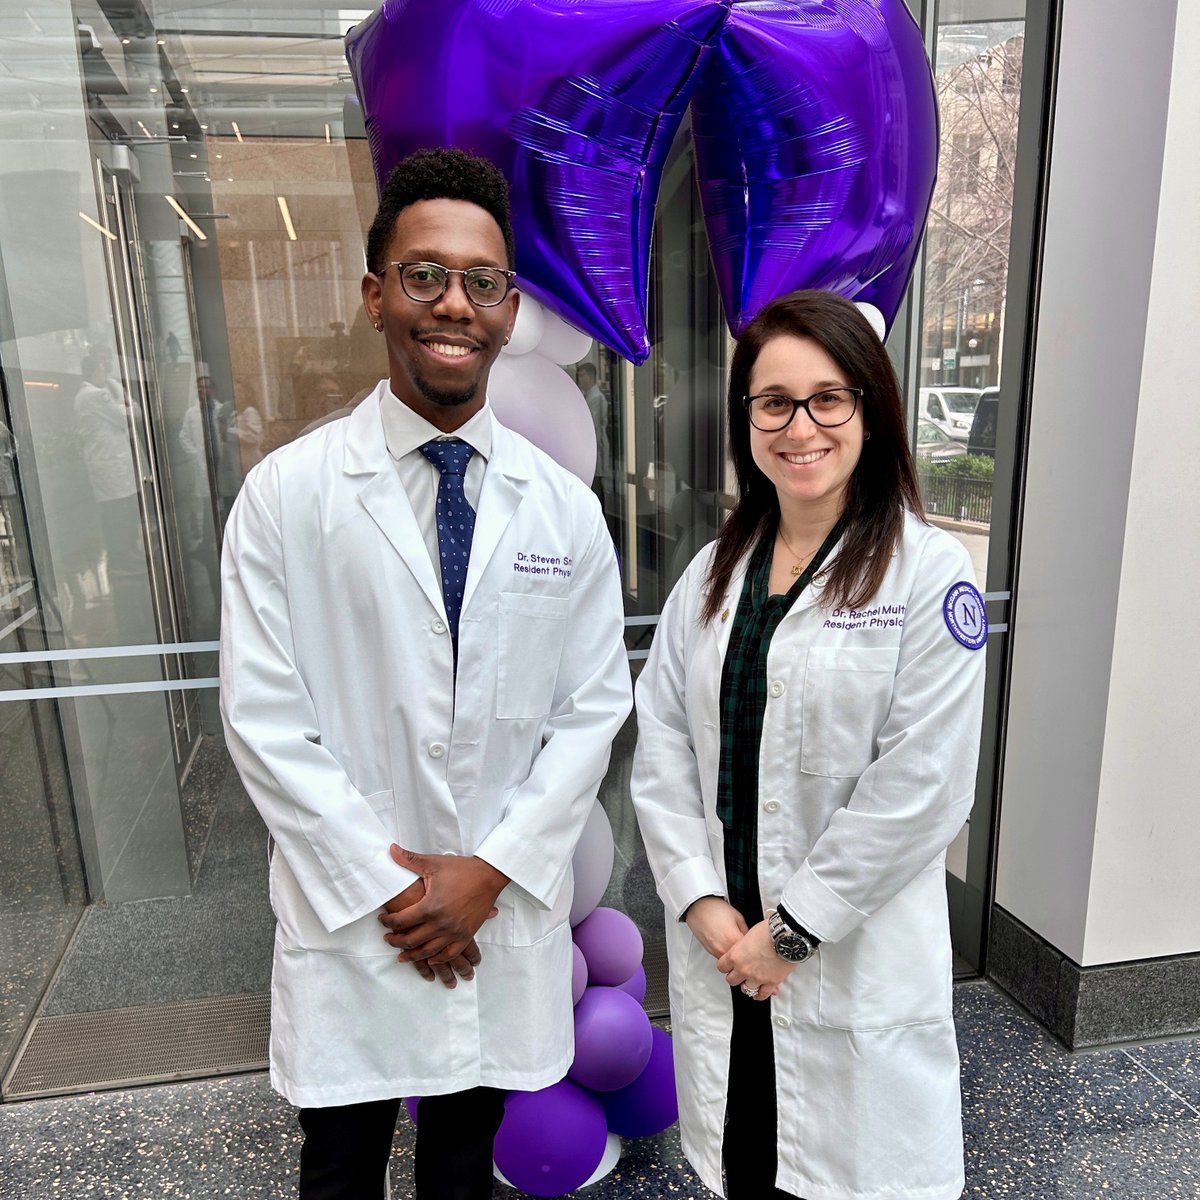 A huge and heartfelt thank you to Drs. Steven Smith (@stevenhsmithMD) and Rachel Multz, our outgoing Chief Residents, for their outstanding leadership and dedication over the past year! #PurplePath